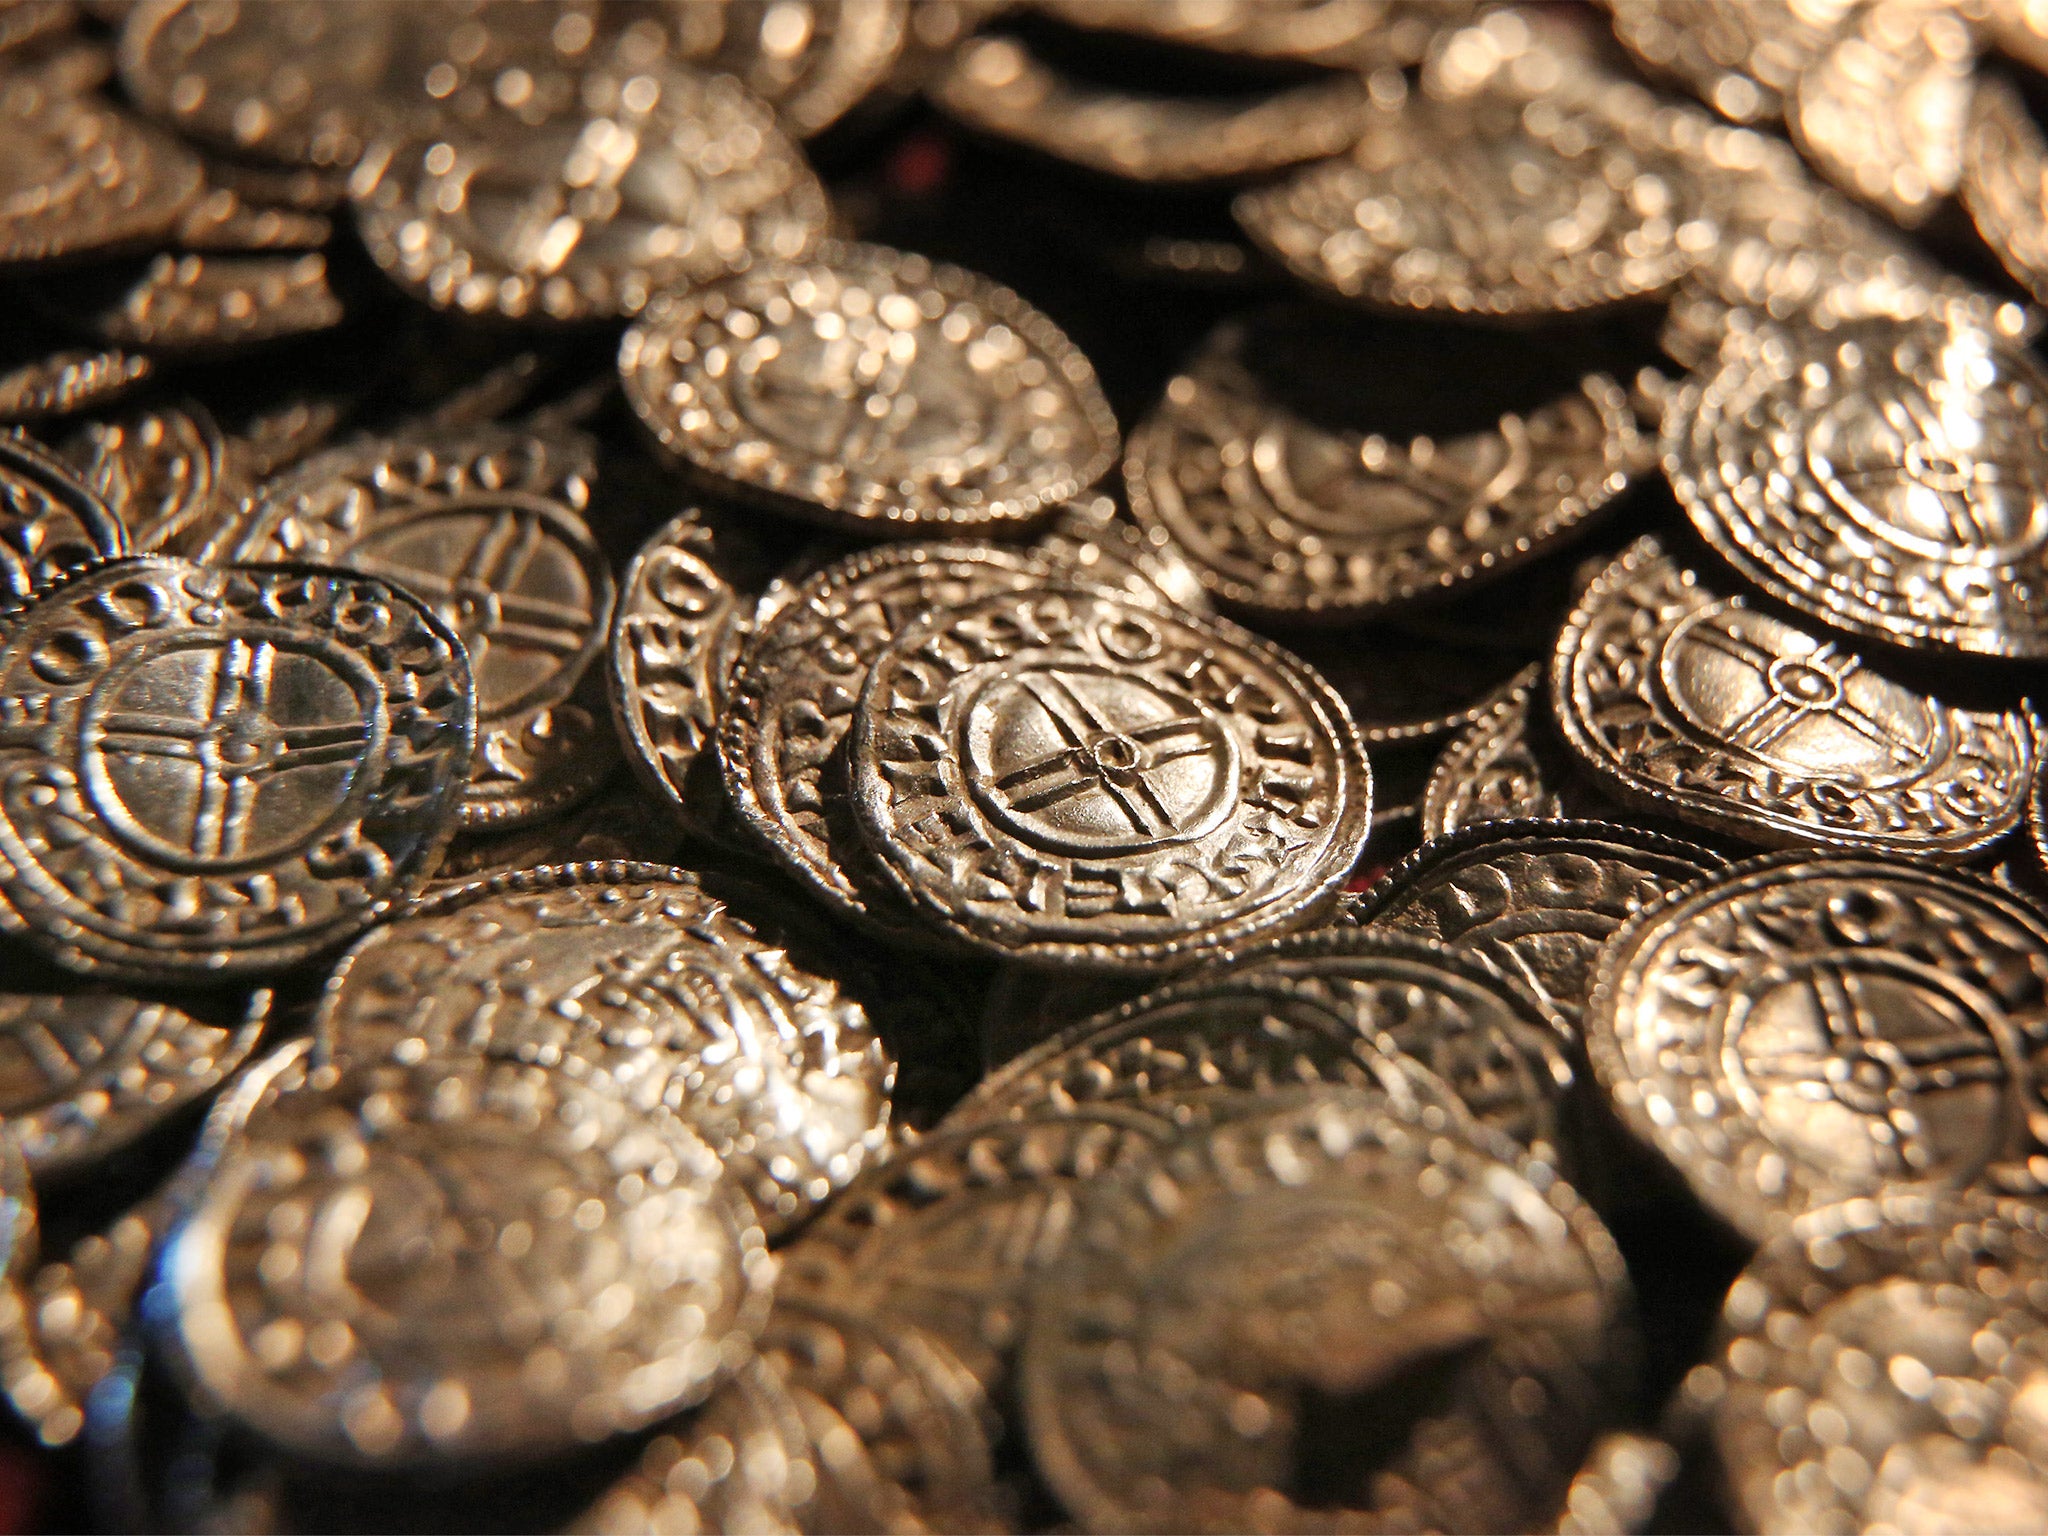 The silver Anglo-Saxon coin hoard containing around 5,200 items was discovered in Lenborough in December